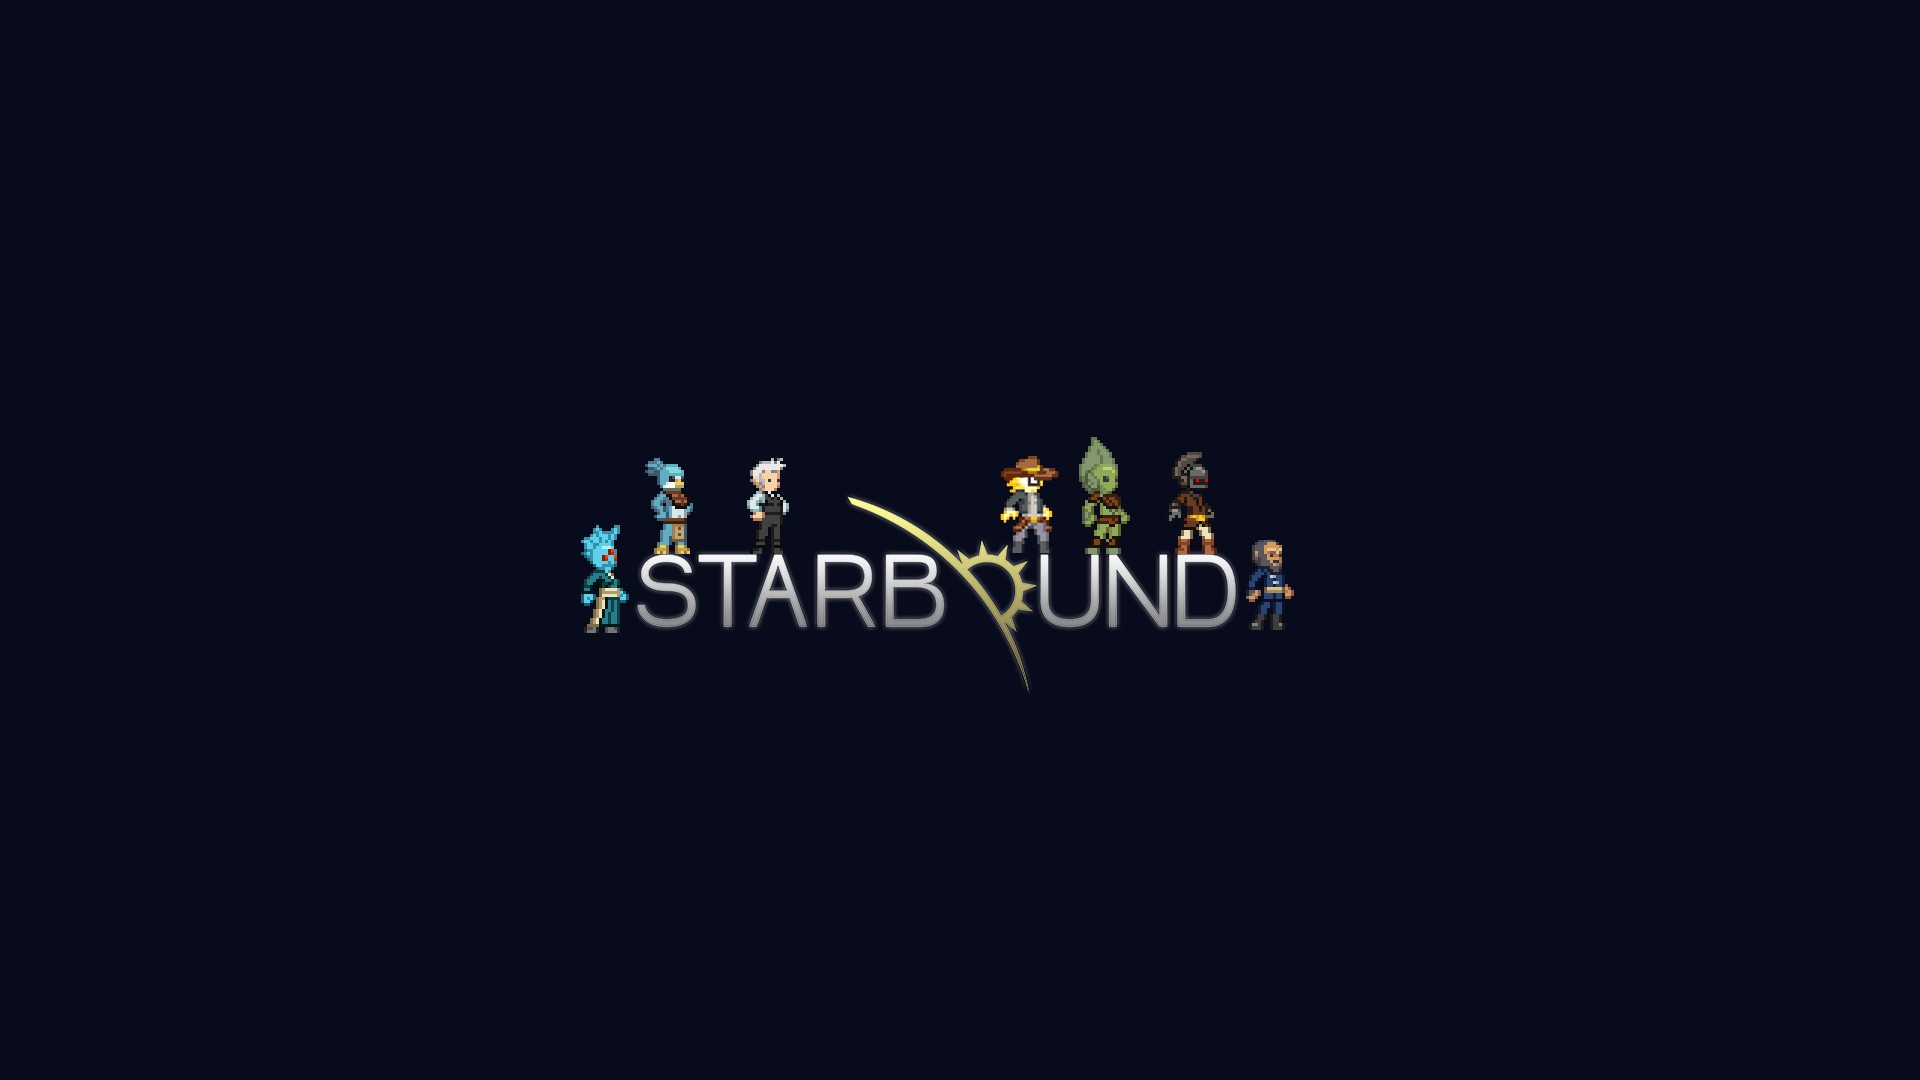 video Games, Starbound, Simple Background, Typography Wallpaper